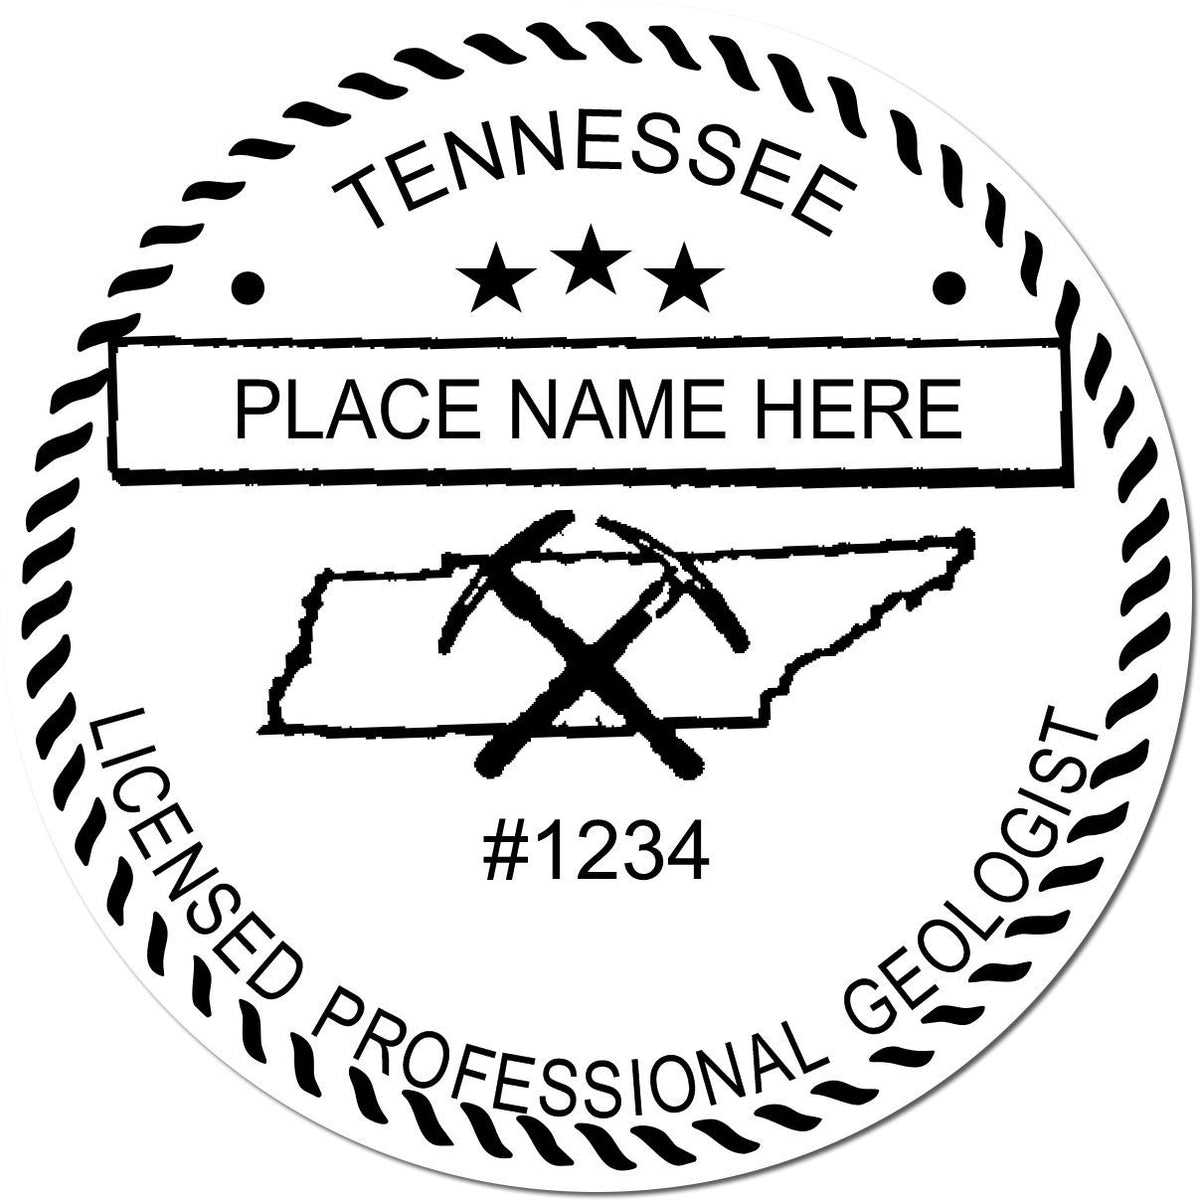 An alternative view of the Premium MaxLight Pre-Inked Tennessee Geology Stamp stamped on a sheet of paper showing the image in use